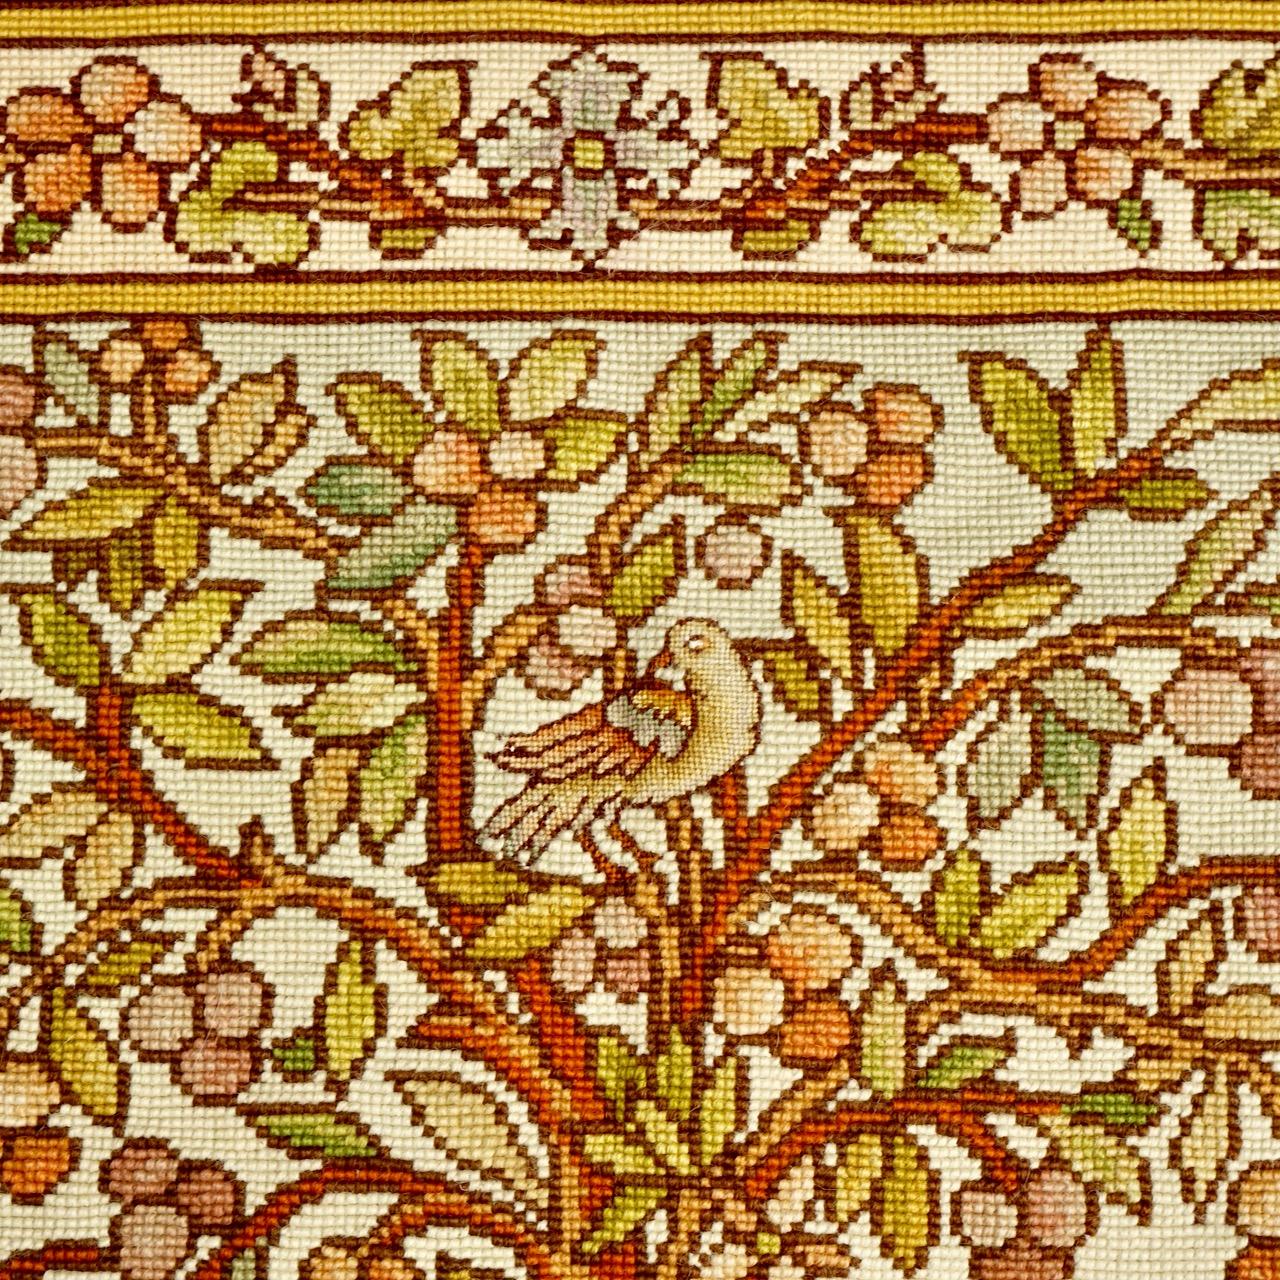 Hand-Crafted Needlepoint Tapestry Medieval Style Fruit Tree Flowers with Dog Rabbit and Bird For Sale